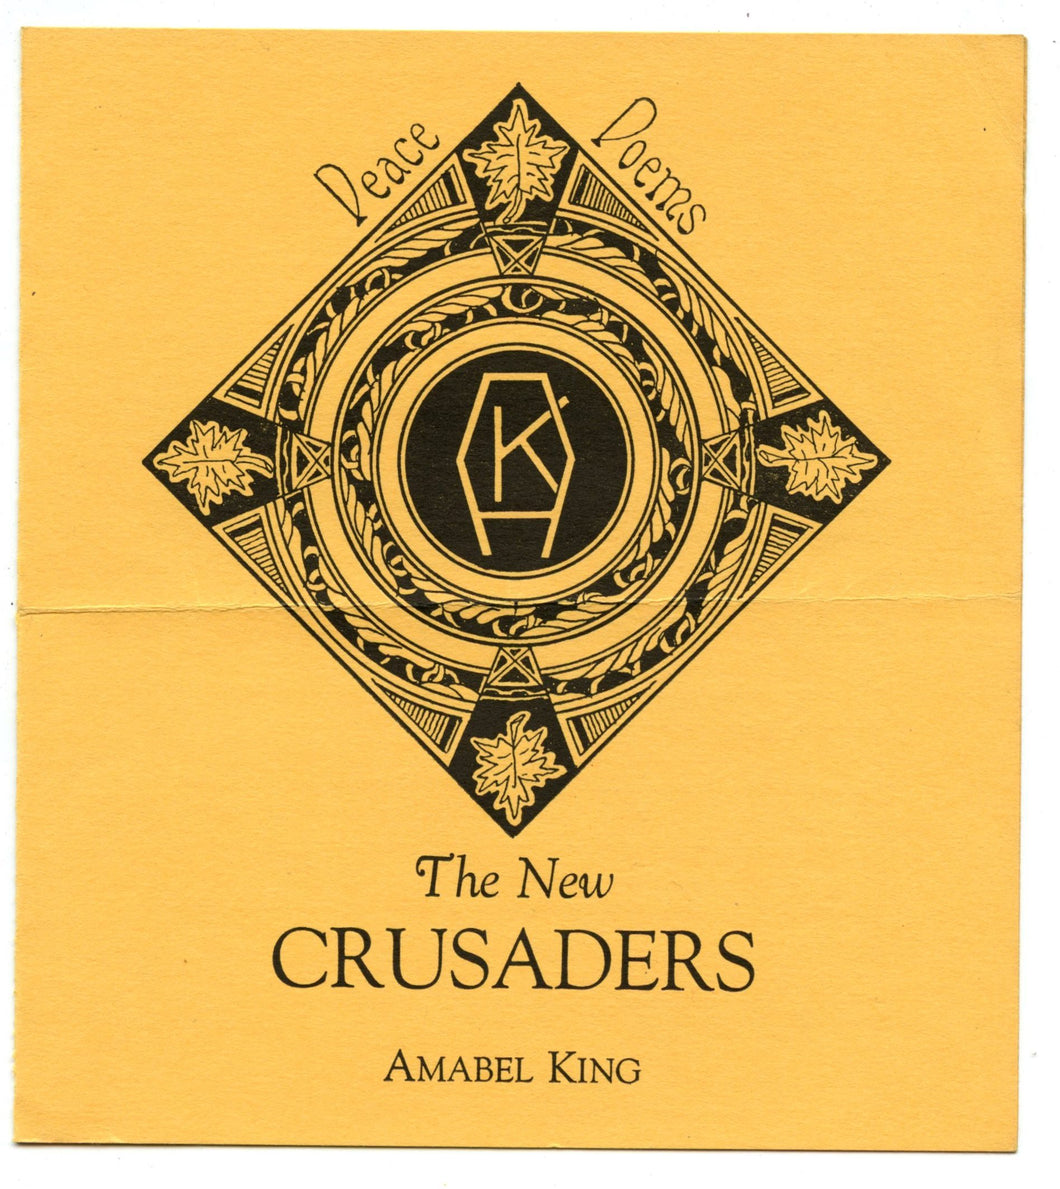 Prospectus and order form for Amabel King's "The New Crusaders"